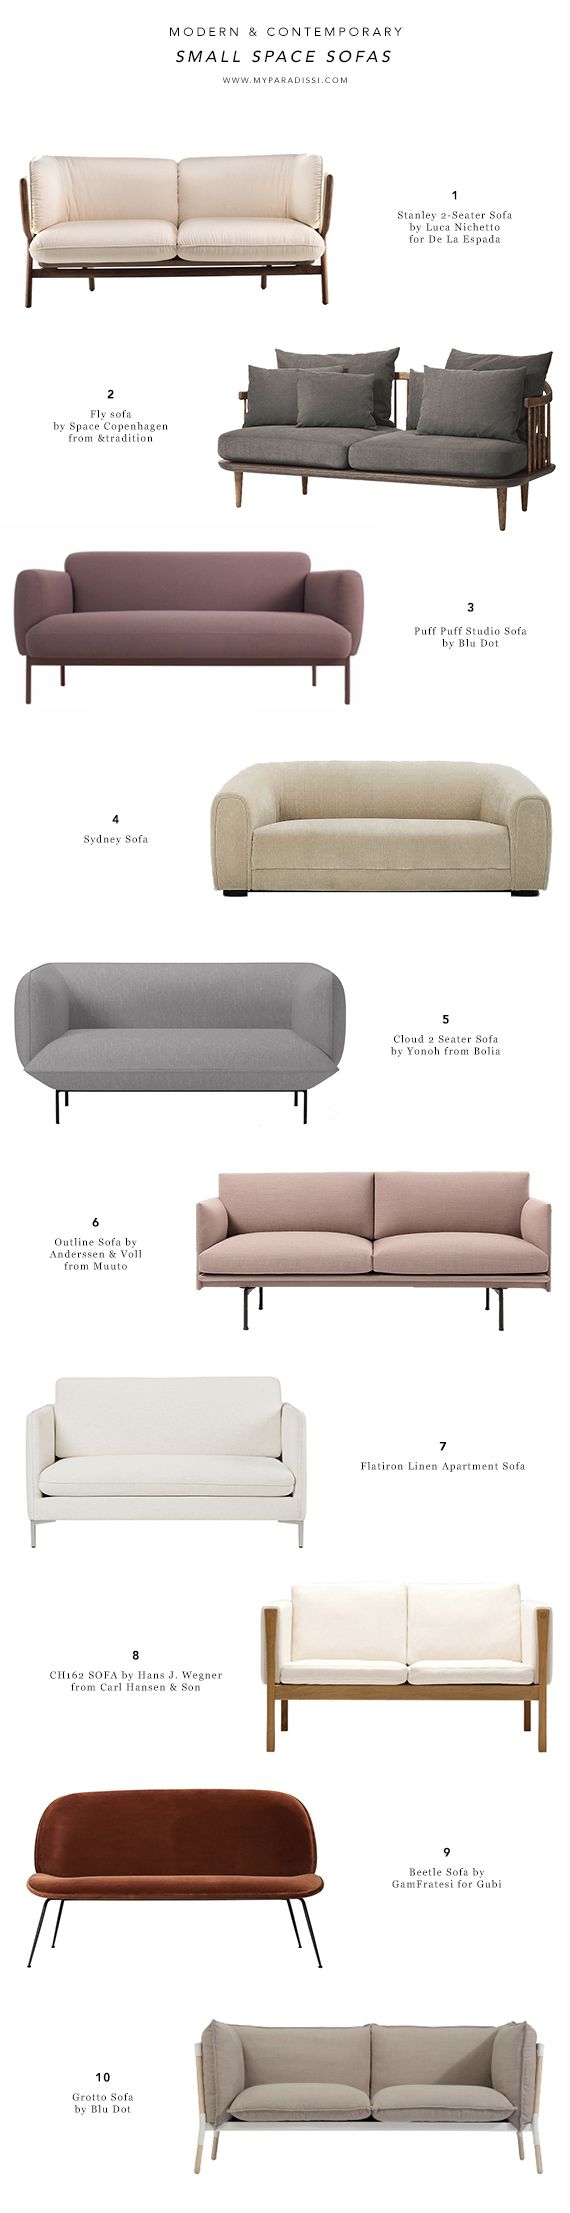 Small space sofas, compact sofas, settees, contemporary loveseats,  apartment sofas